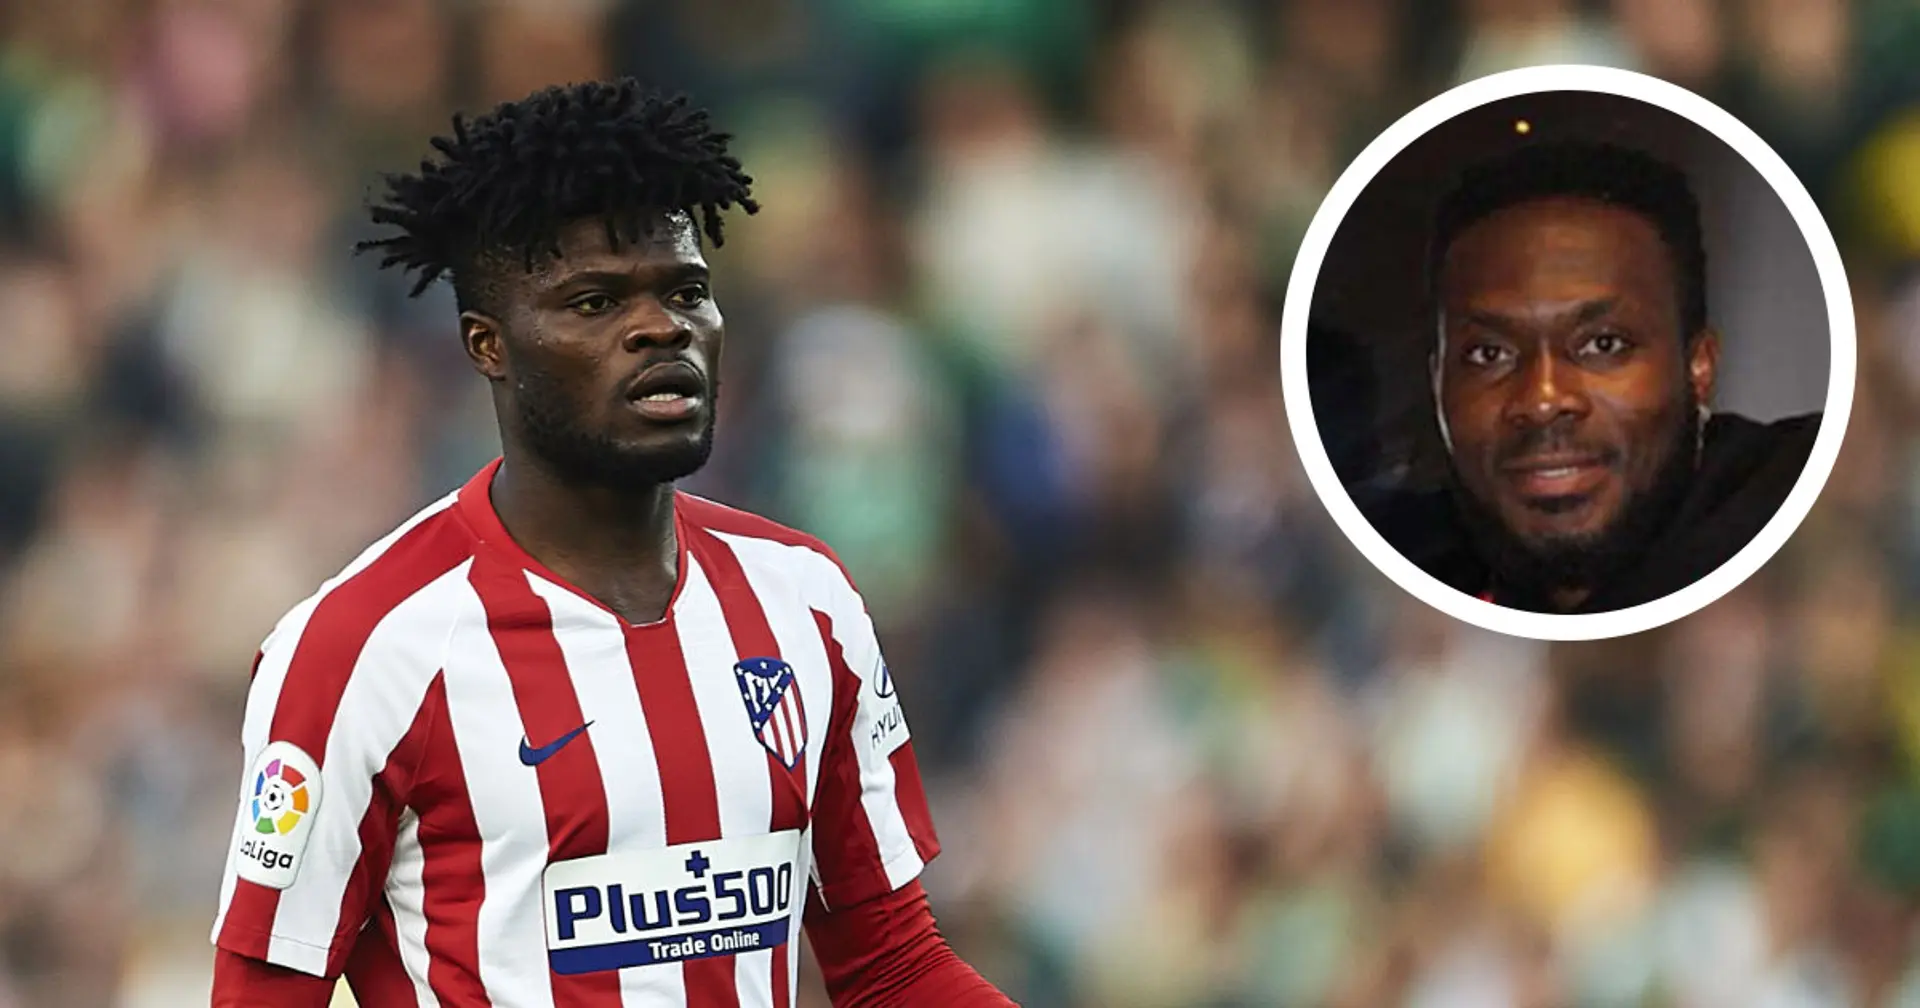 'He has to move to a different league to prove his worth': Yet another Ghana player speaks in favour of Partey's move to Arsenal